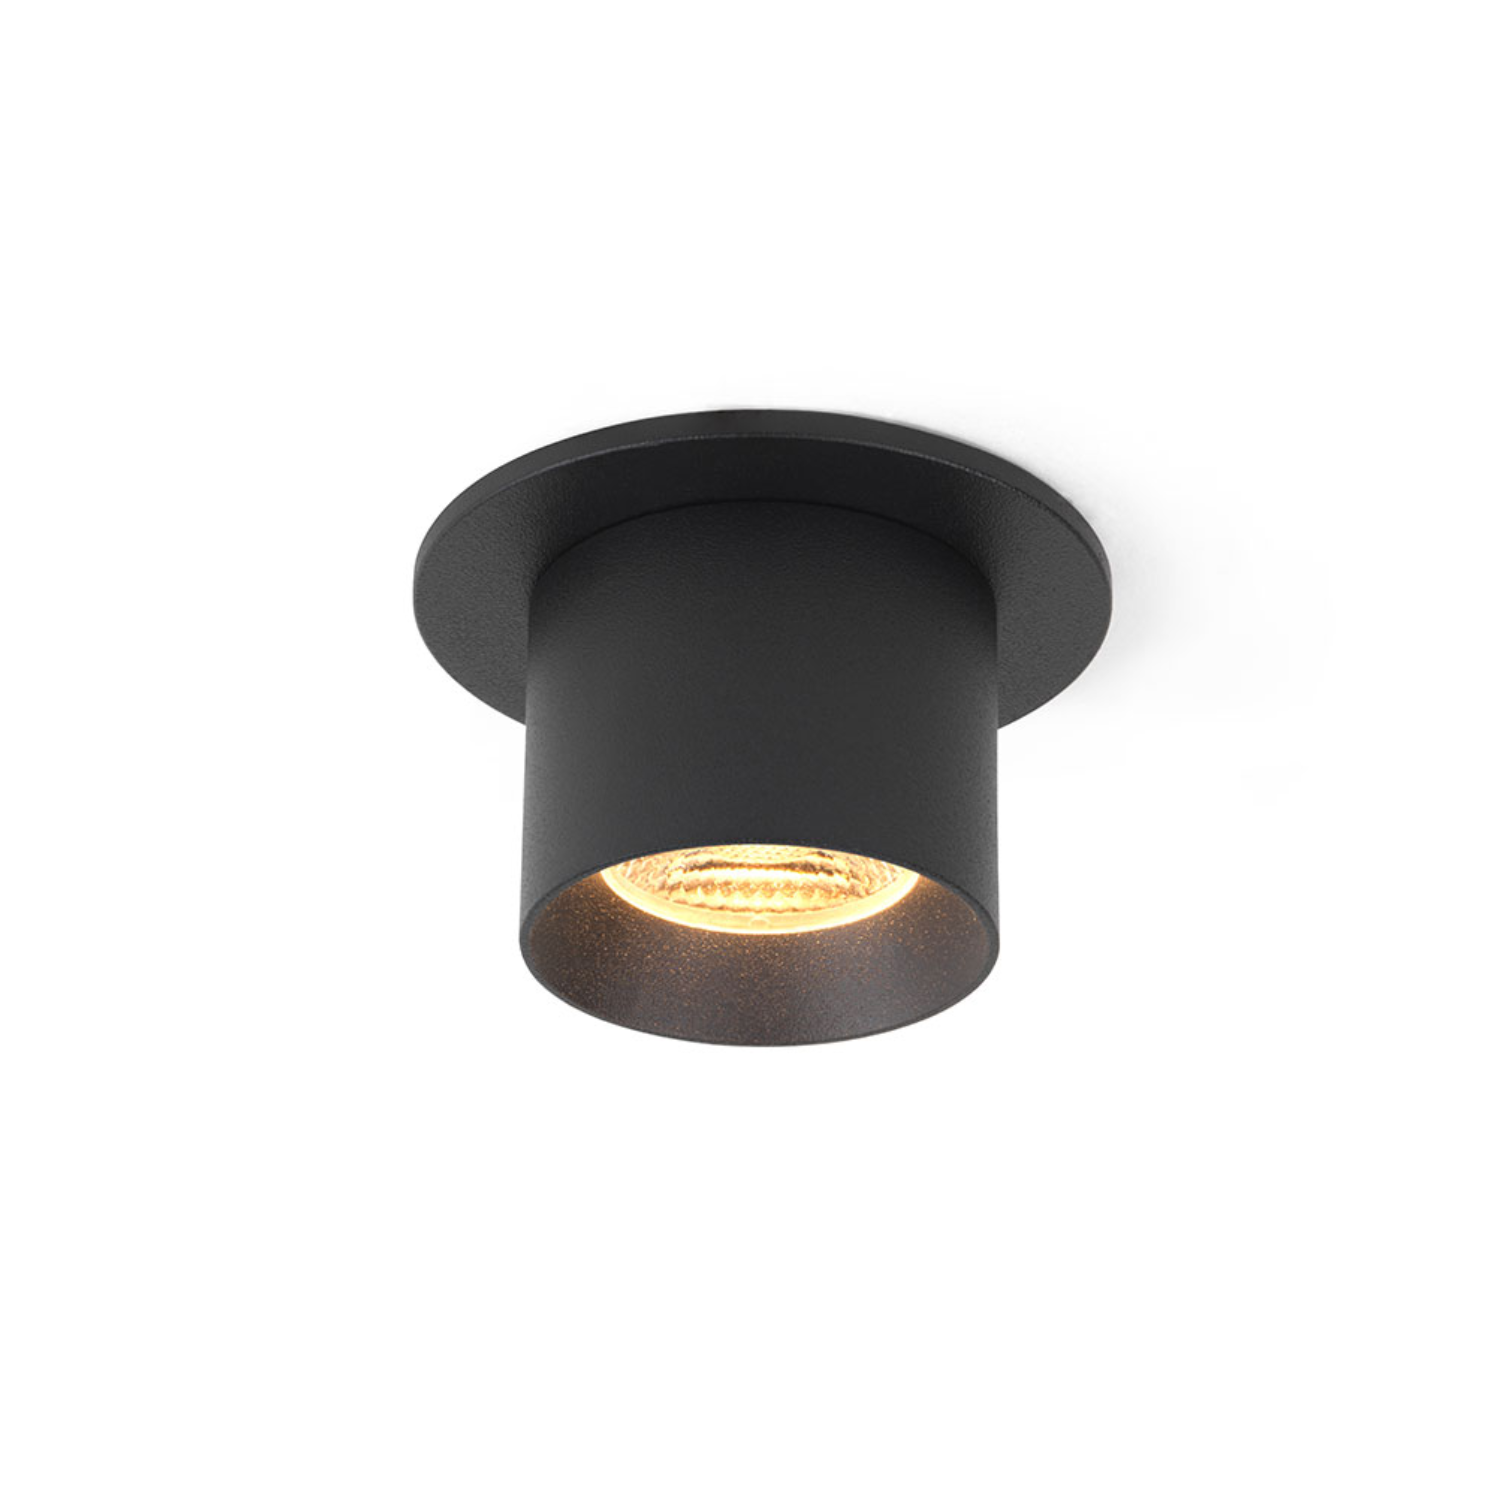 AUDY-IN OUT - Ceiling Light